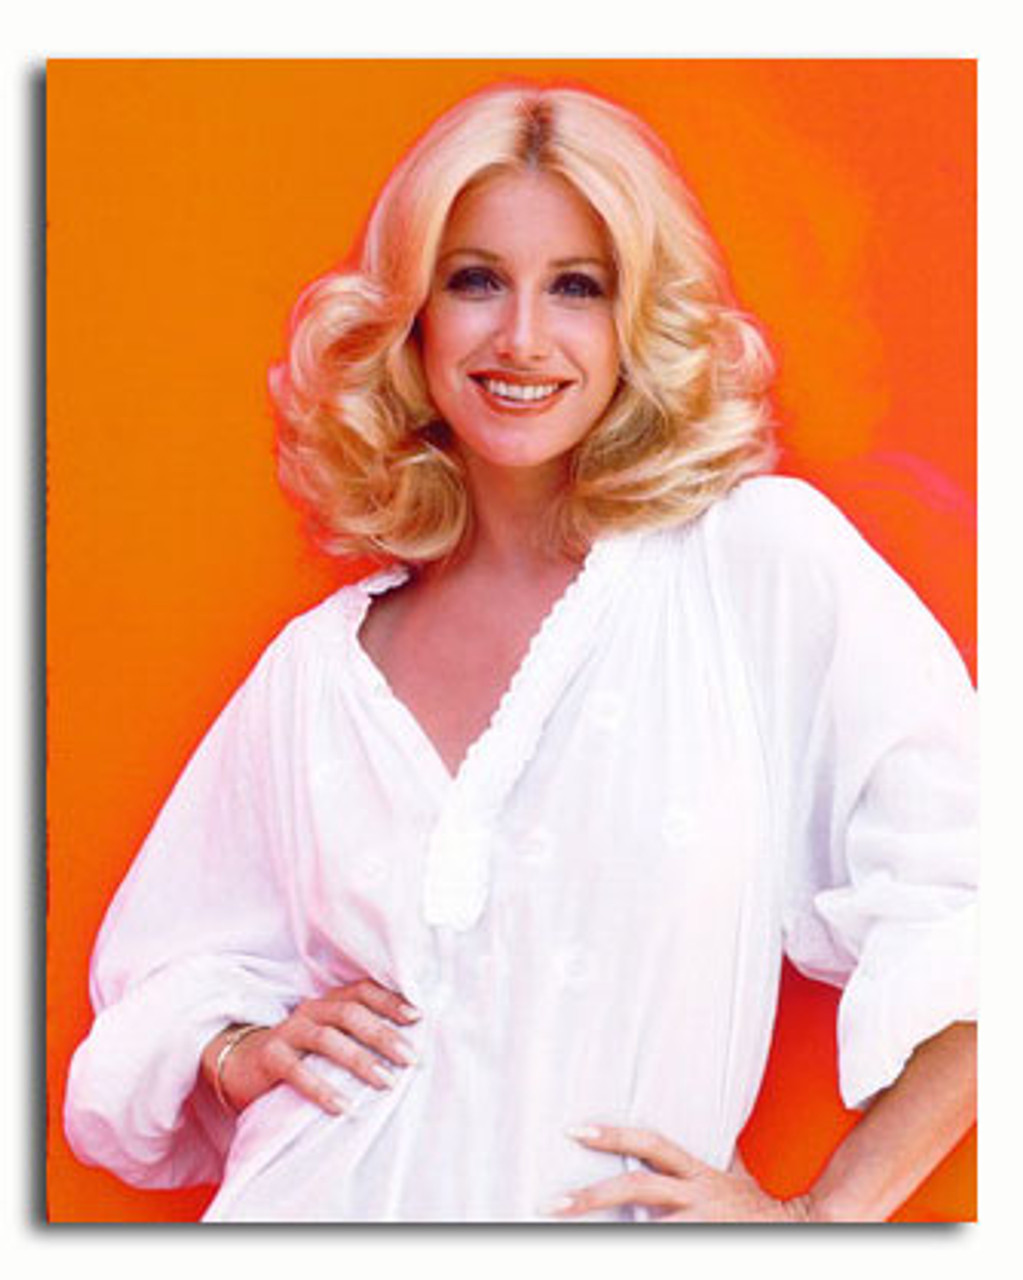 ss3417609_-_photograph_of_suzanne_somers_available_in_4_sizes_framed_or_unframed_buy_now_at_st...jpg